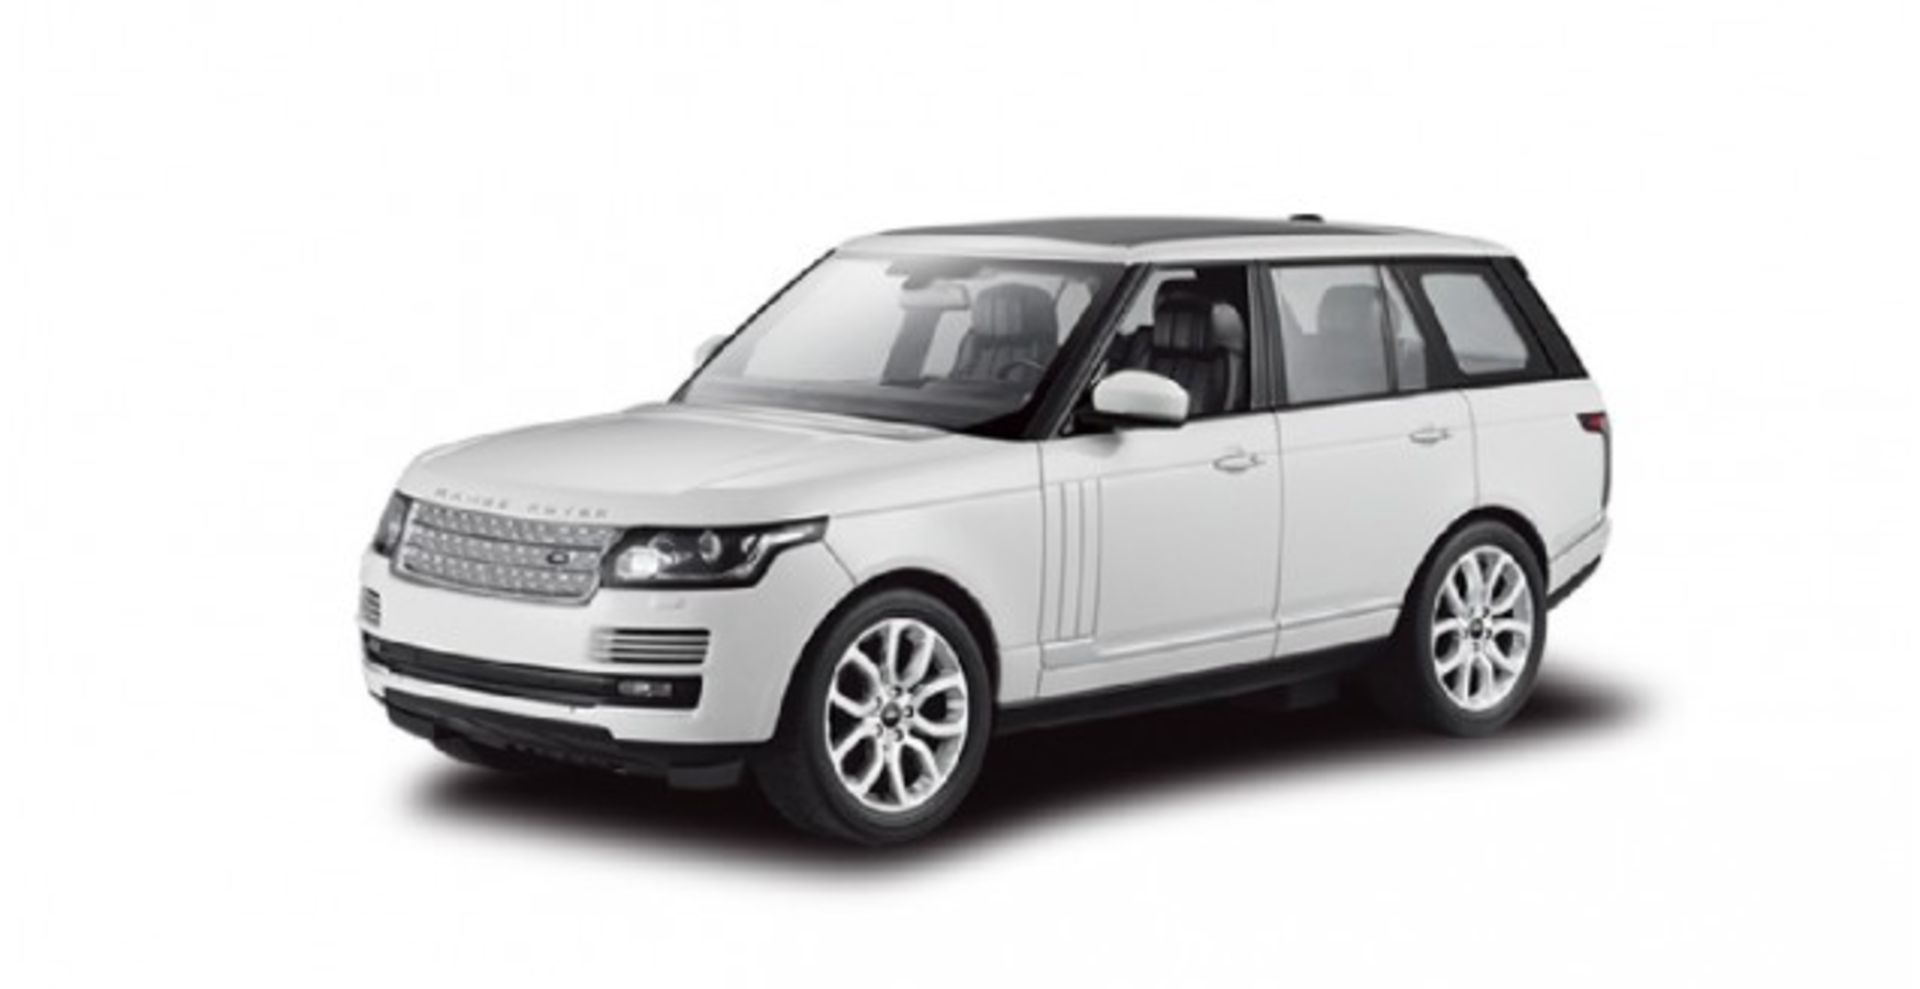 V *TRADE QTY* Brand New Range Rover 1:14 sCALE Full Function RC Car With Headlights And Tail